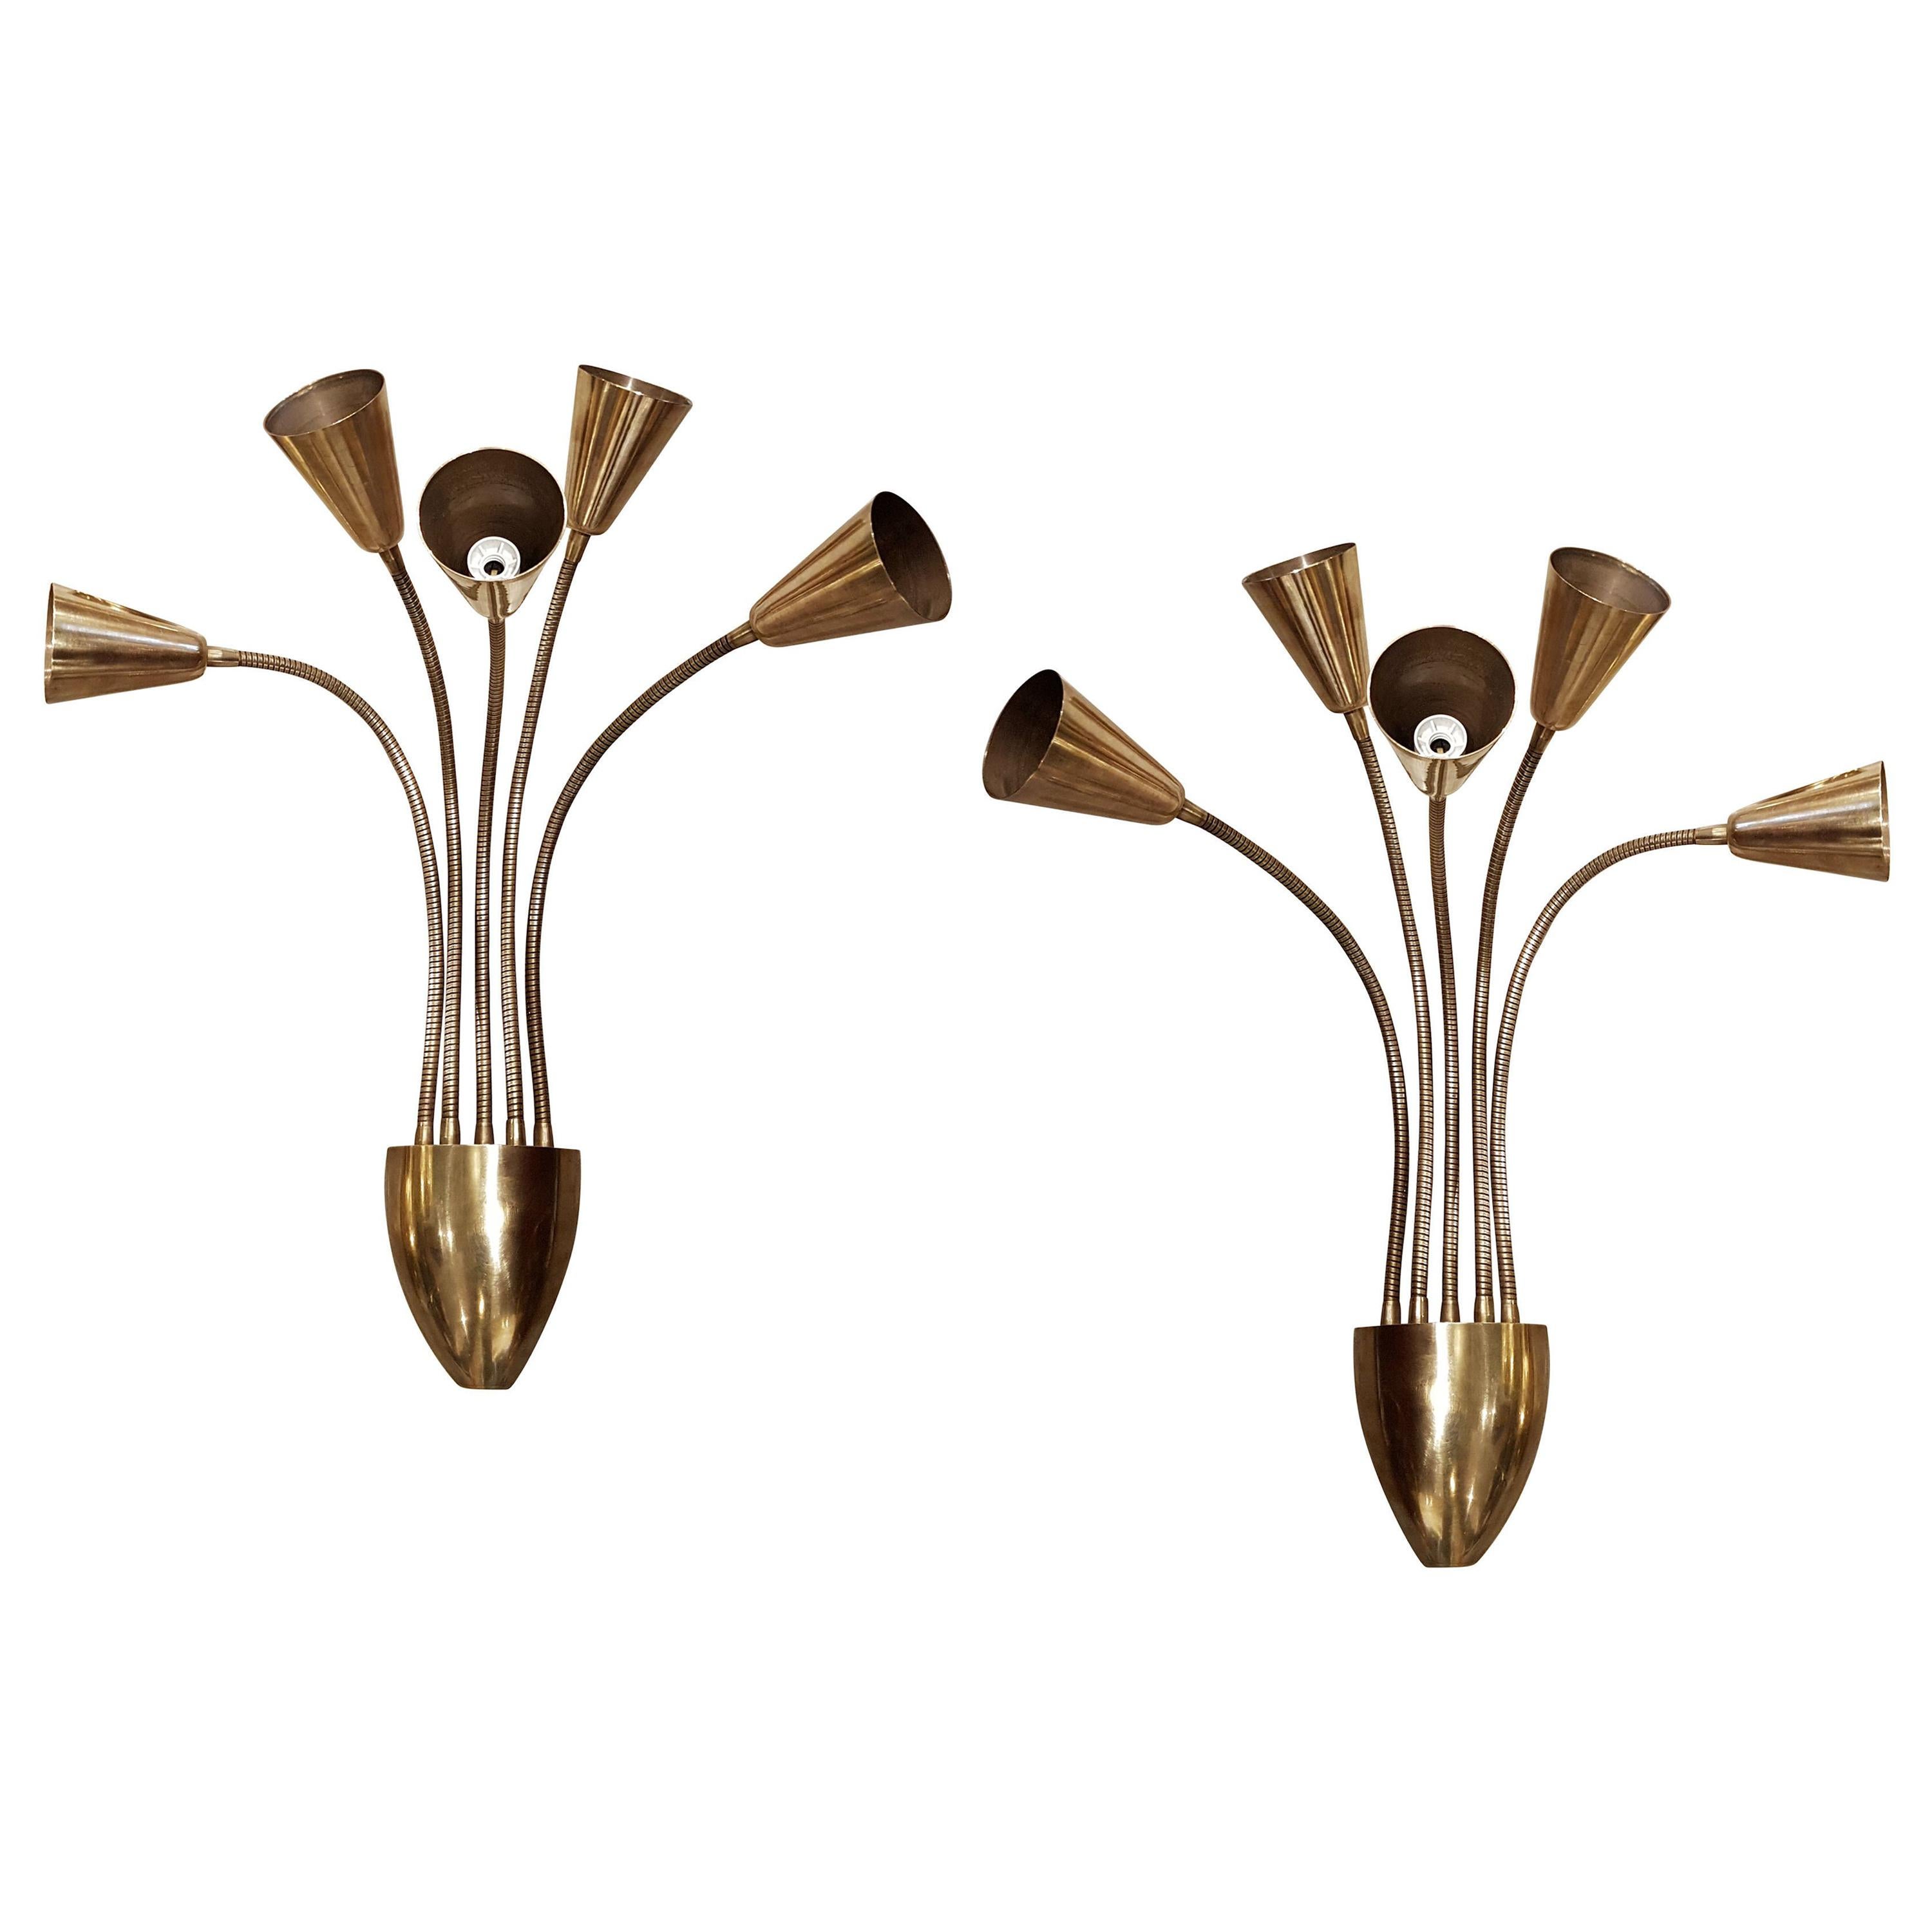 Pair of articulated 5 arms, brass Mid-Century Modern sconces, by Gino Sarfatti and produced by Arteluce, Italy, 1960s.
5 candelabra base lights each, rewired with UL materials
Shape and size adjustable.
Very modern, classy Italian style wall